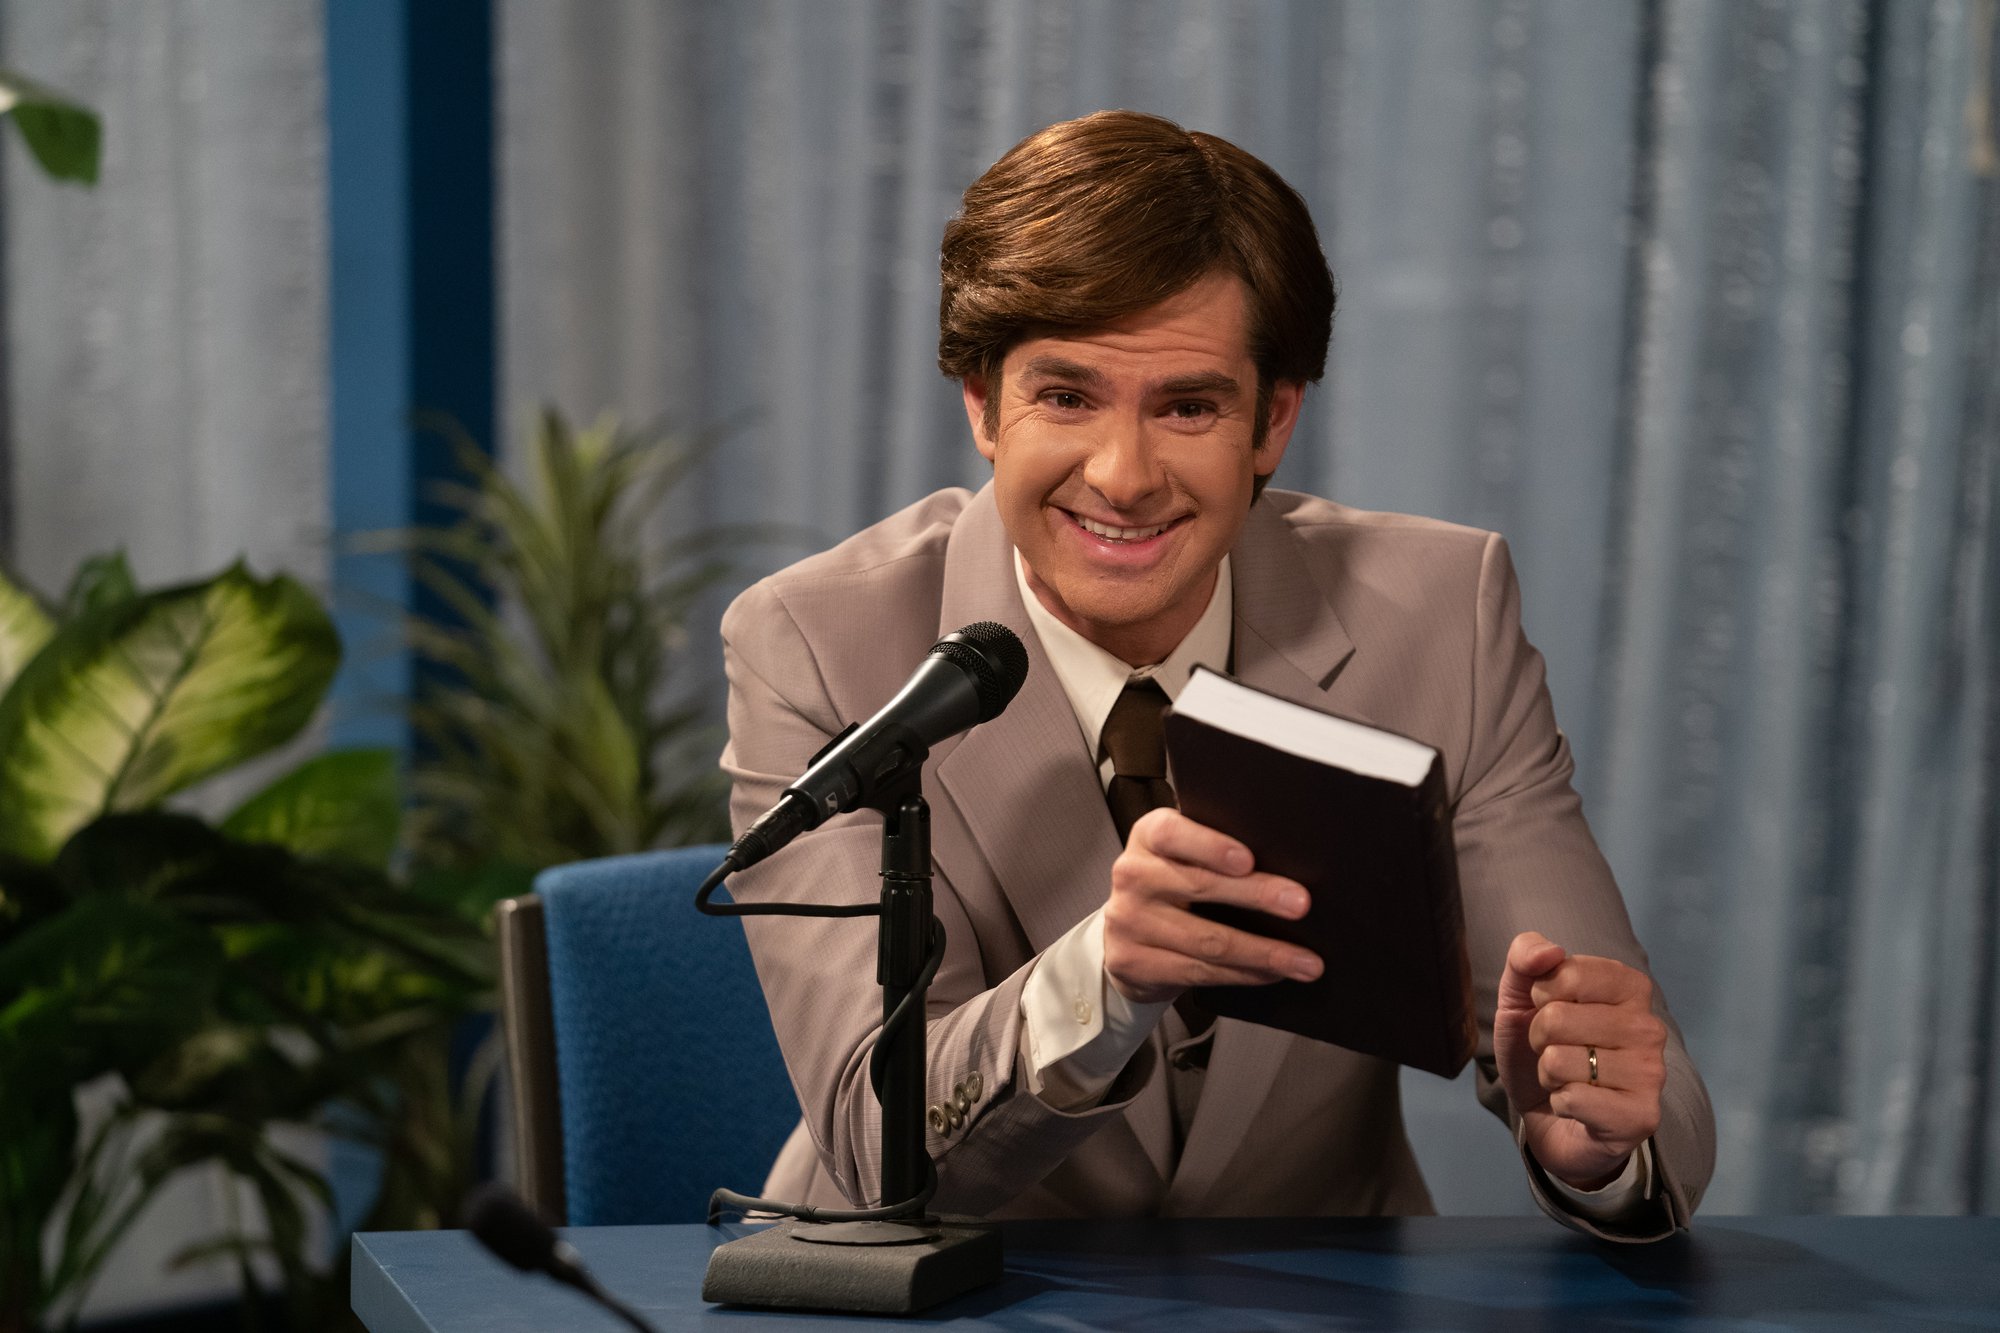 Andrew Garfield as Jim Bakker in 'The Eyes of Tammy Faye' holding a book in front of a microphone